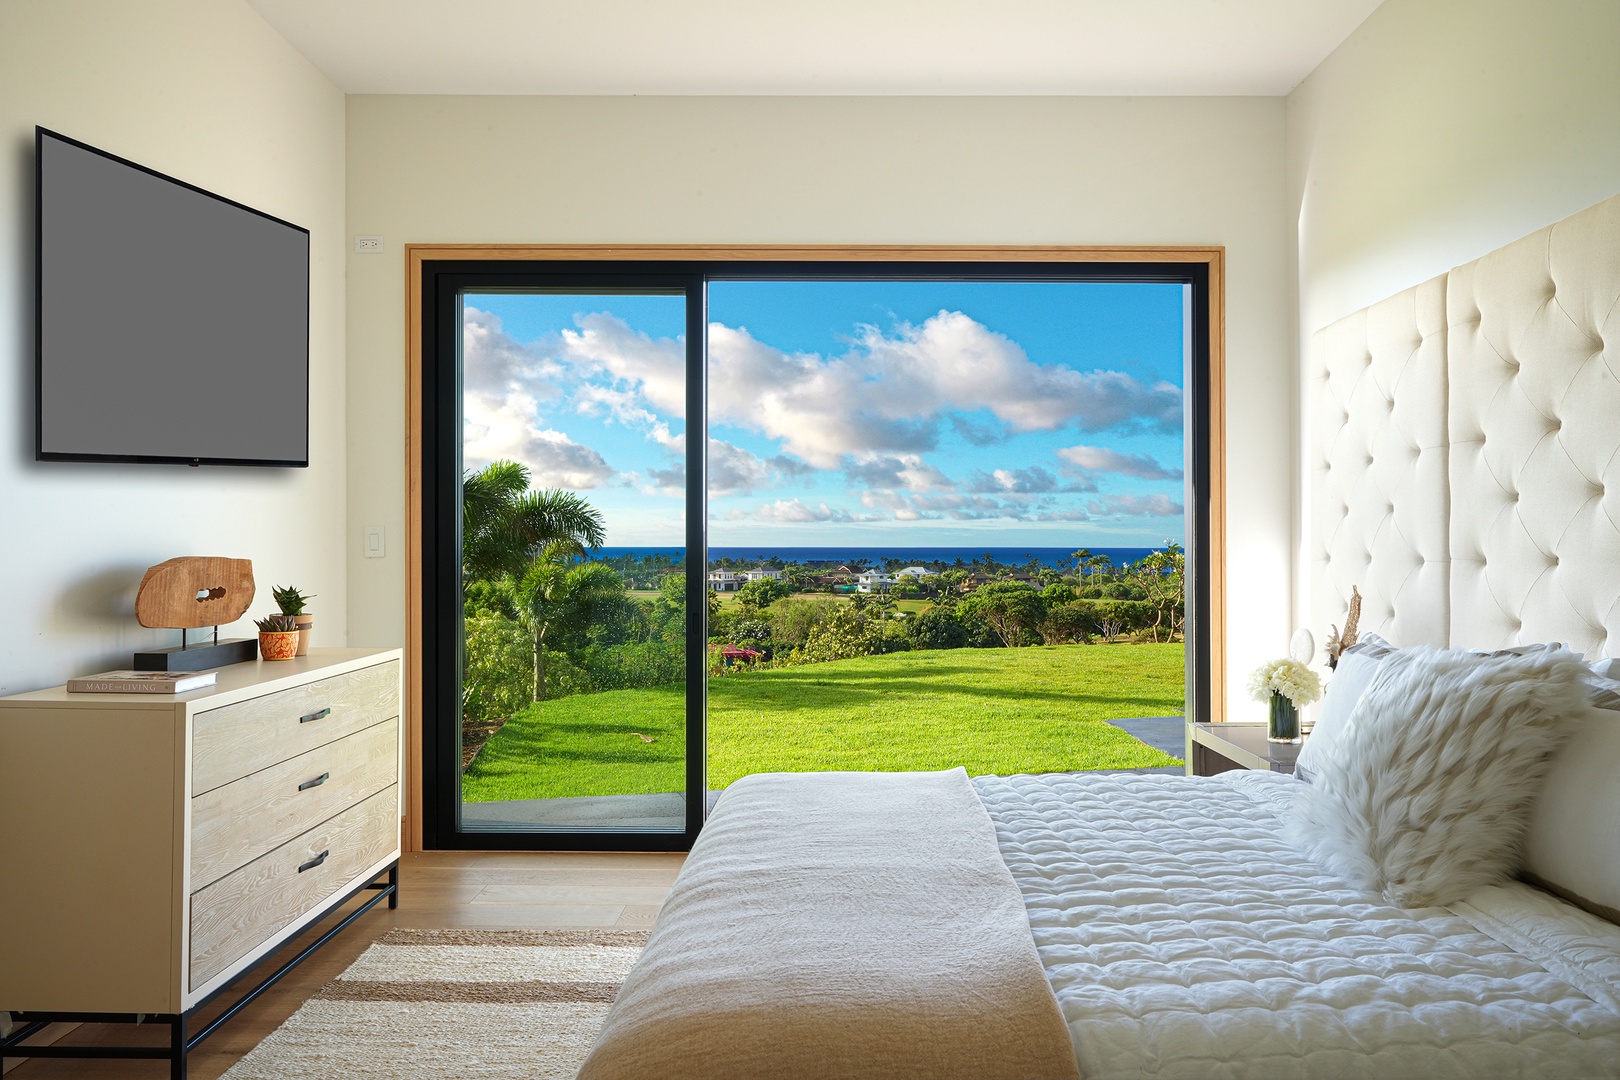 Koloa Vacation Rentals, Hale Keaka at Kukui'ula - Awake in the guest bedroom 1 to a picturesque landscape framed by expansive sliding doors, inviting the beauty of the outdoors into your peaceful haven.